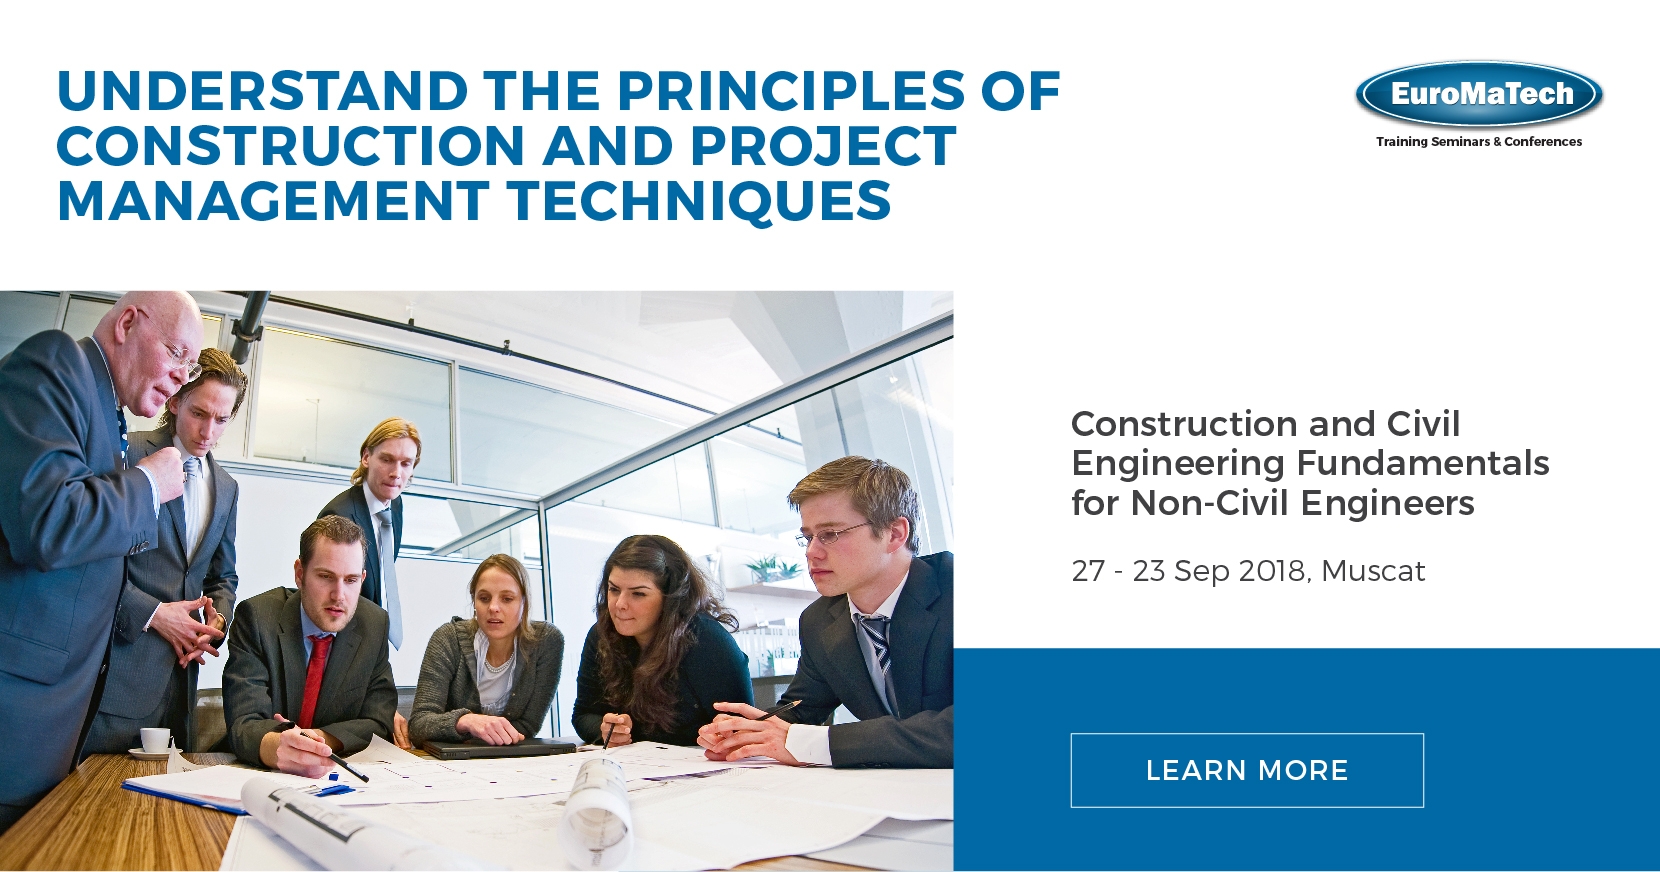 Construction and Civil Engineering Fundamentals for Non-Civil Engineers Training Course